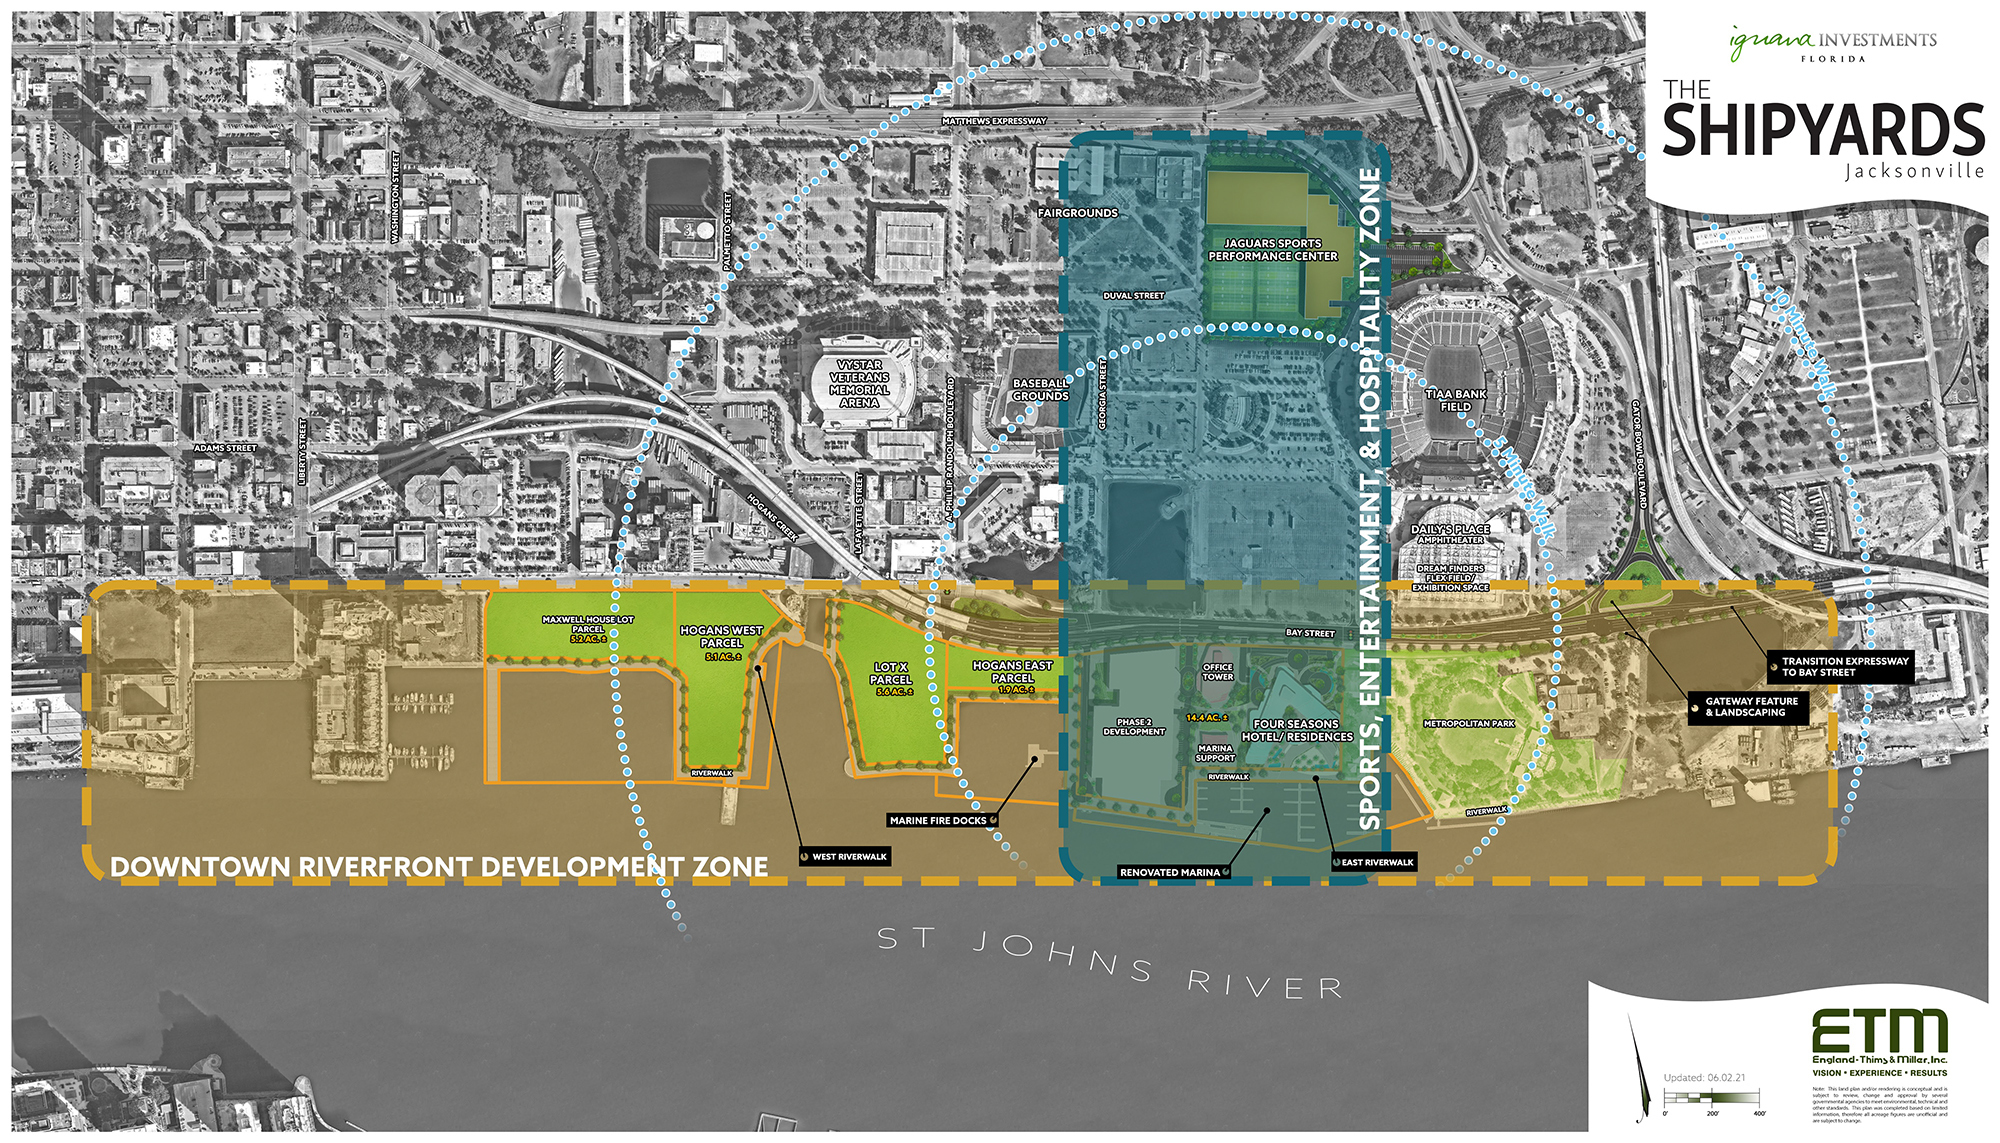 A map of the Shipyards shows the area planned for development by the Jaguars in dark blue.